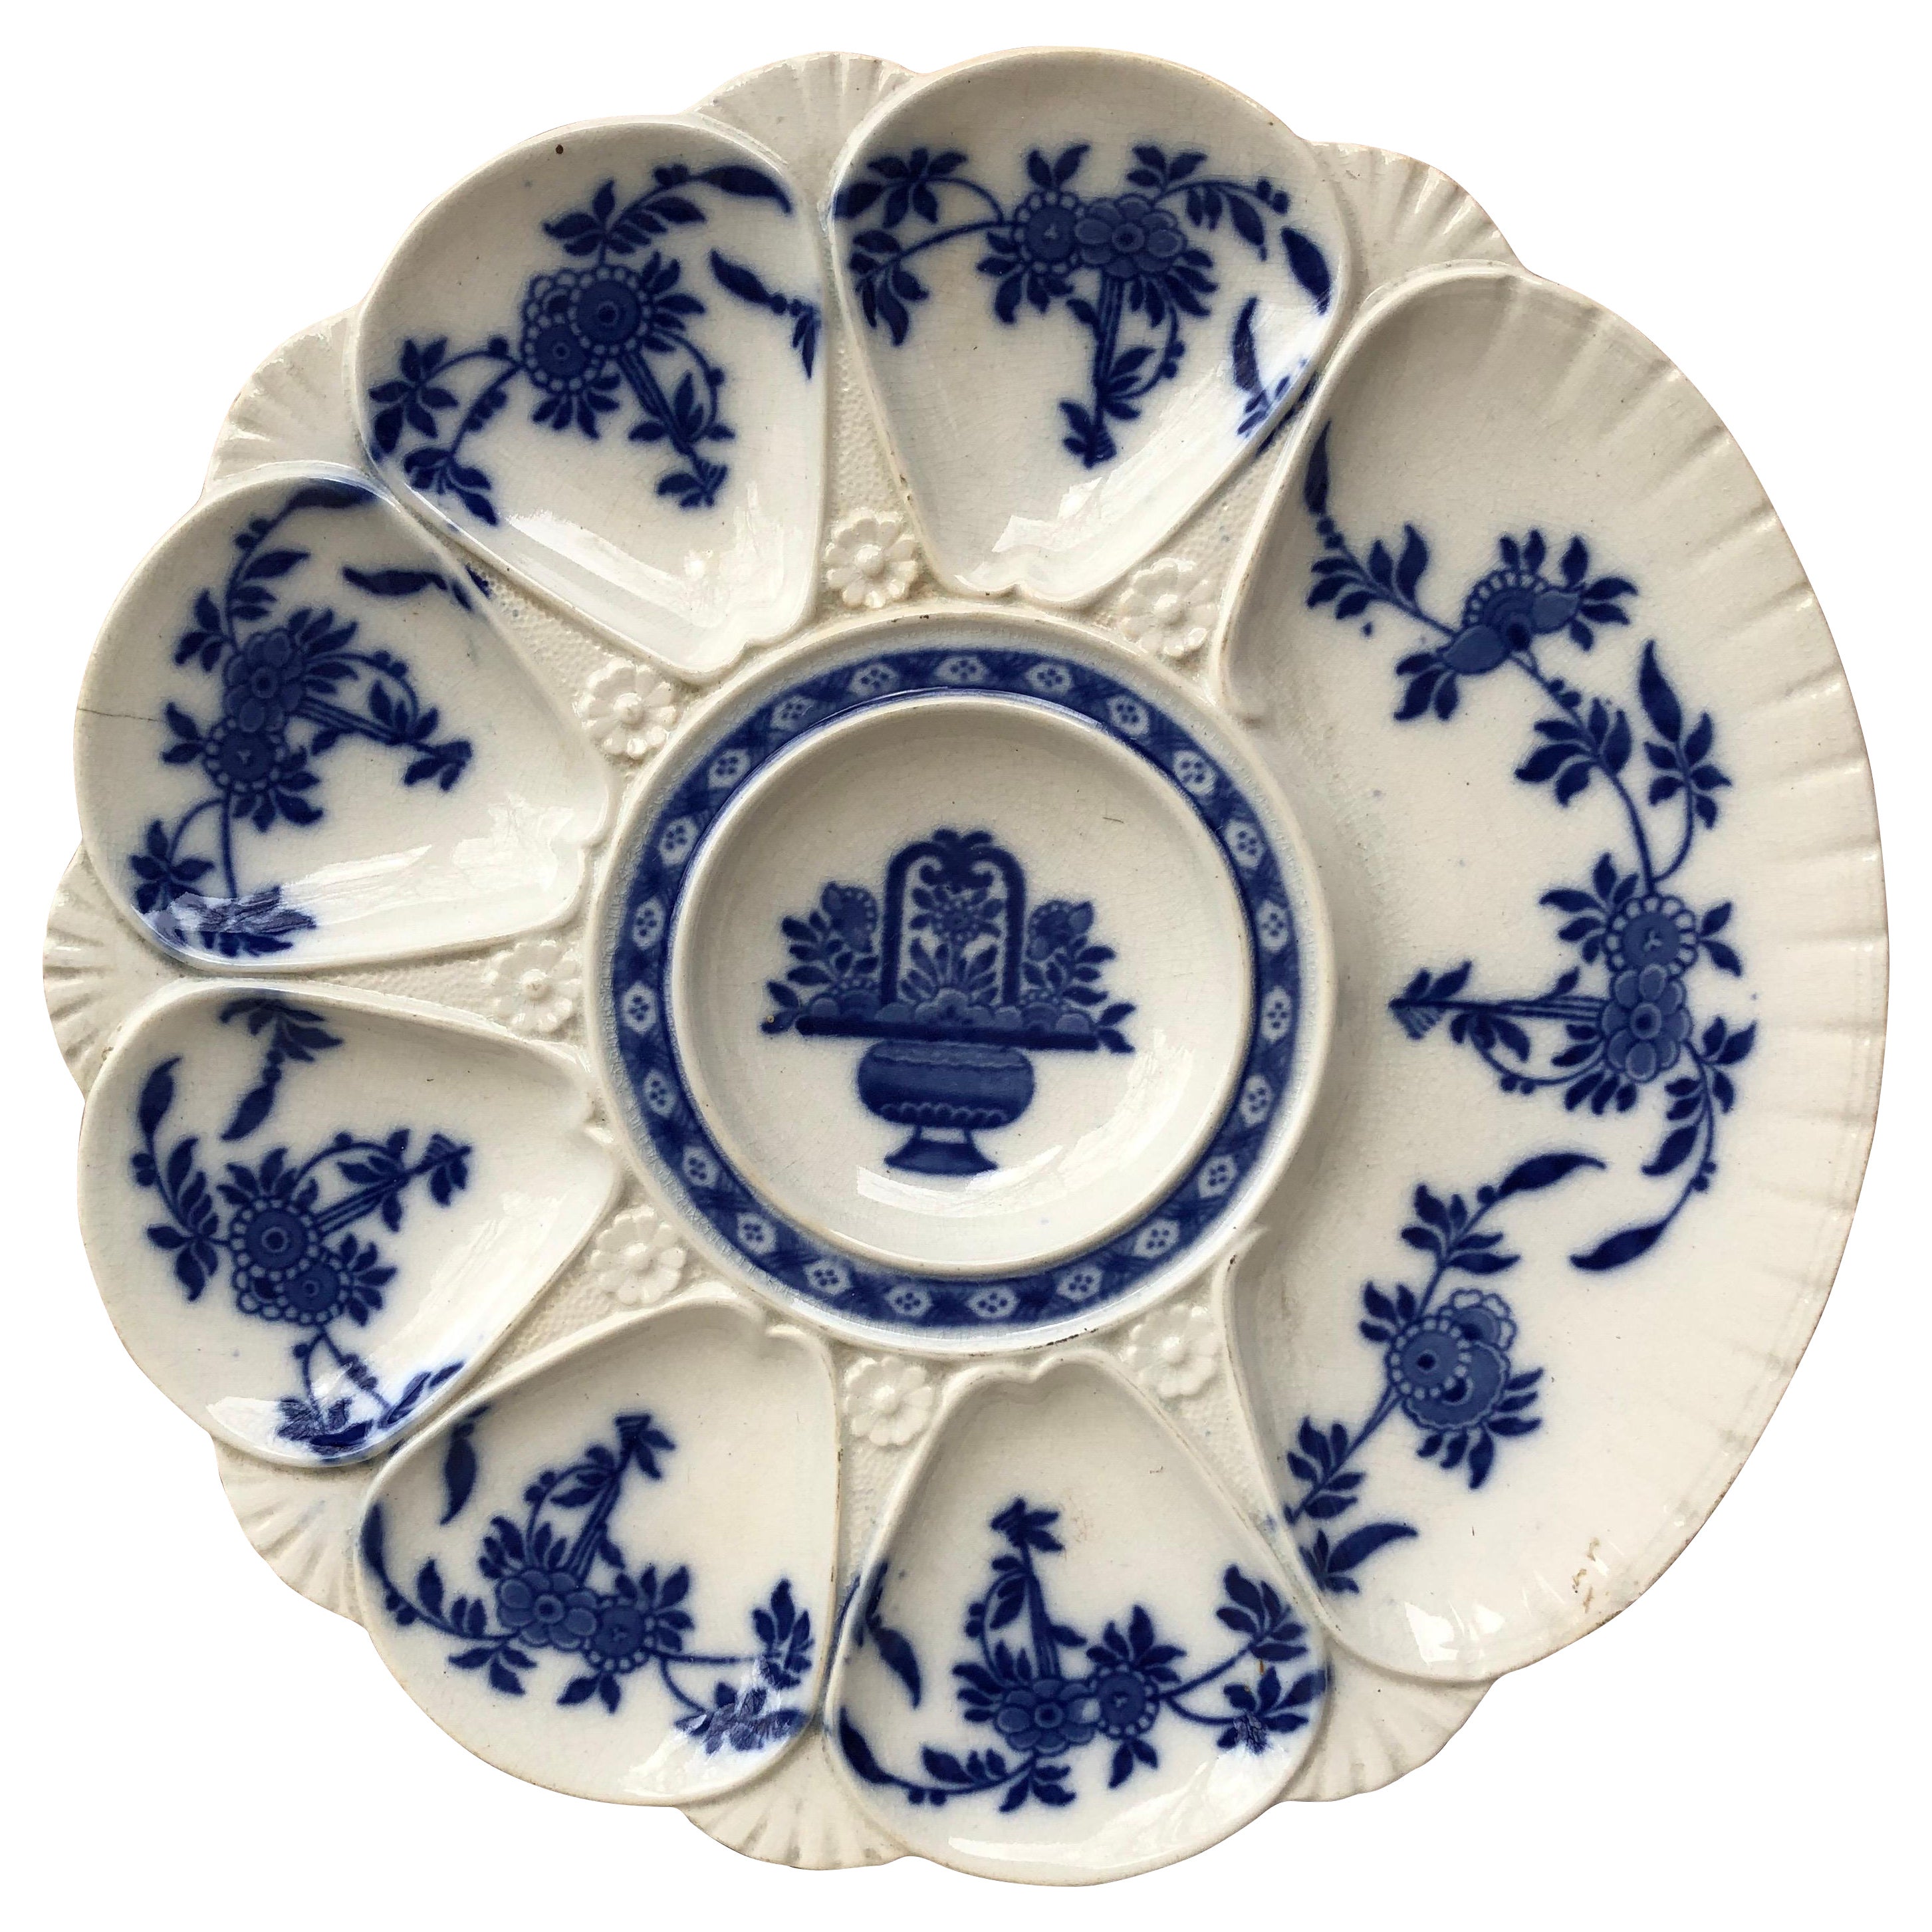 19th Century Minton's China Delft Blue and White Oyster Plate